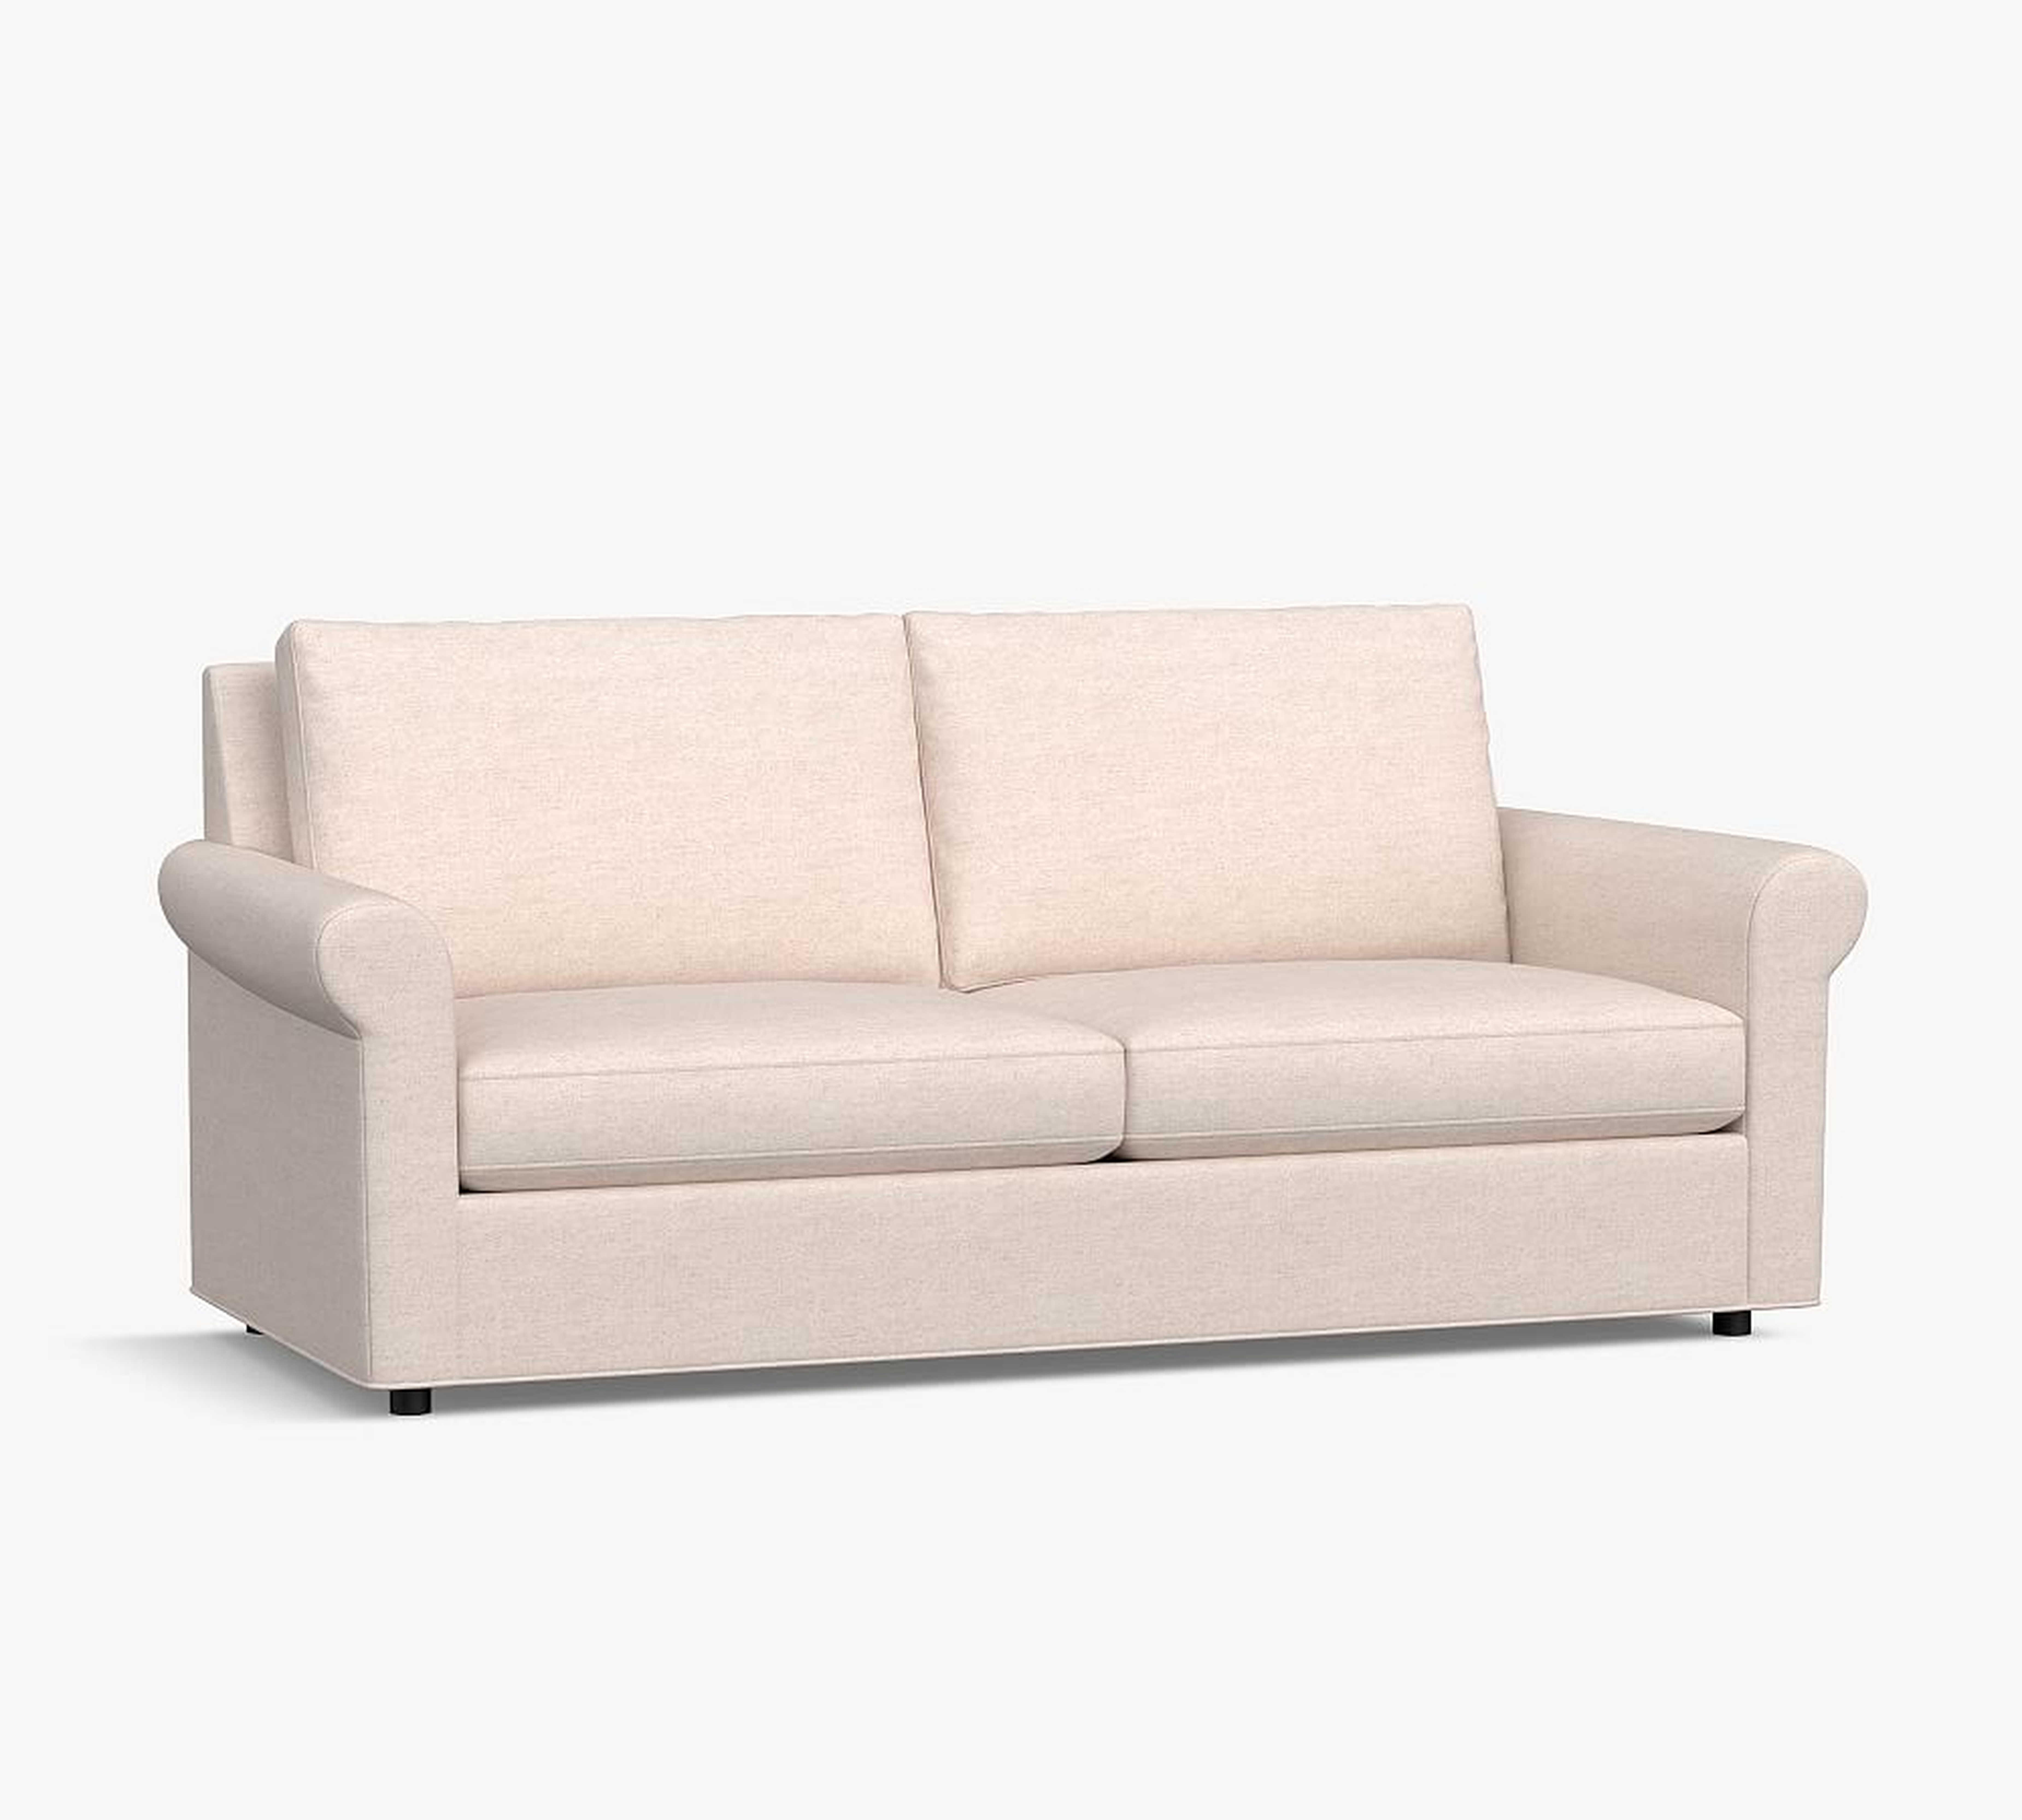 Sanford Roll Arm Upholstered Sofa 77", Polyester Wrapped Cushions, Performance Heathered Basketweave Dove - Pottery Barn